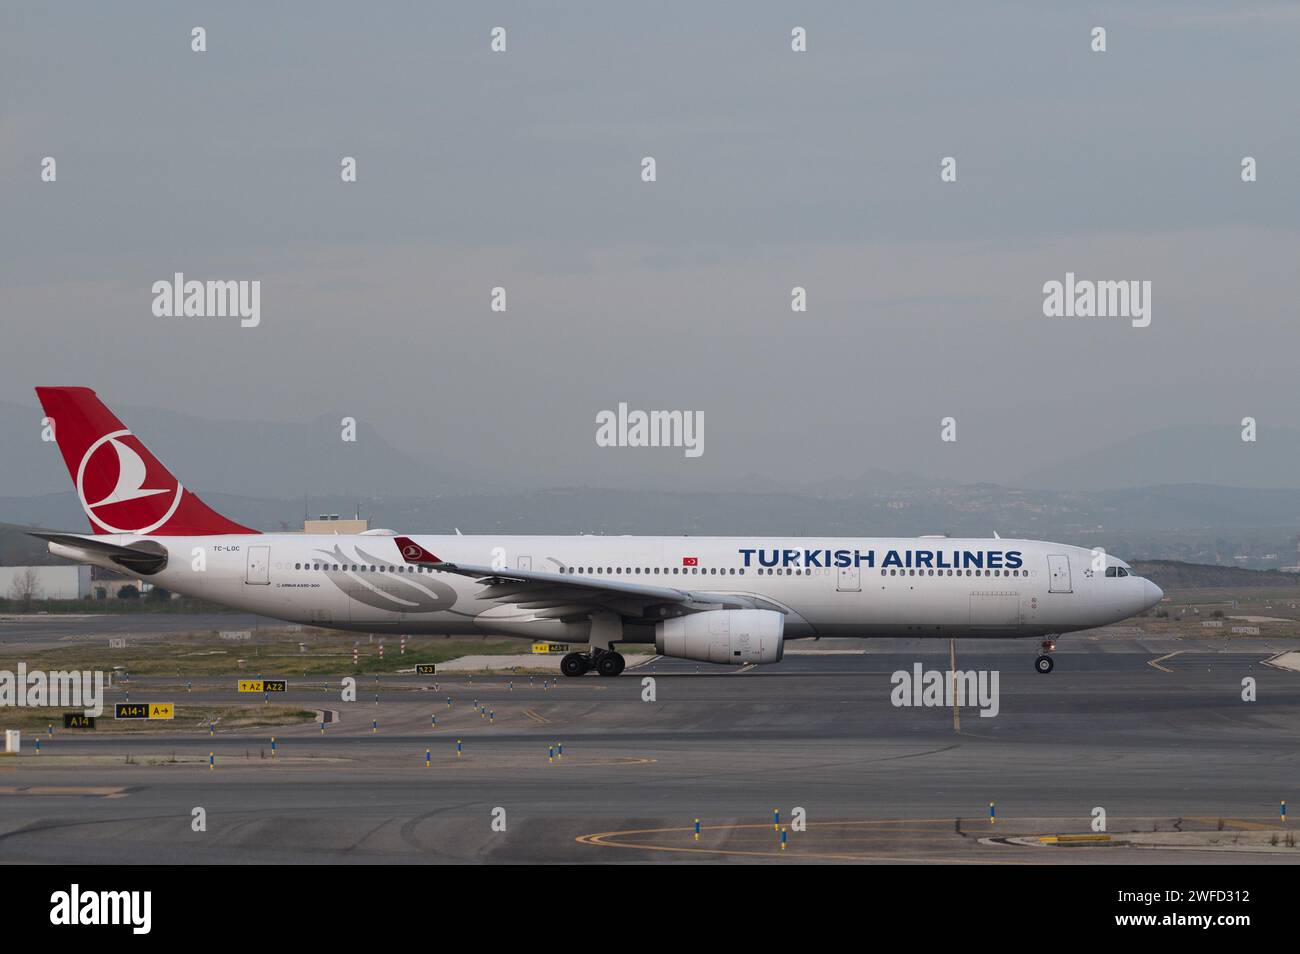 An Airbus A330 commercial flight of Turkish Airlines in a runway of Adolfo Suarez Madrid-Barajas Airport. Stock Photo